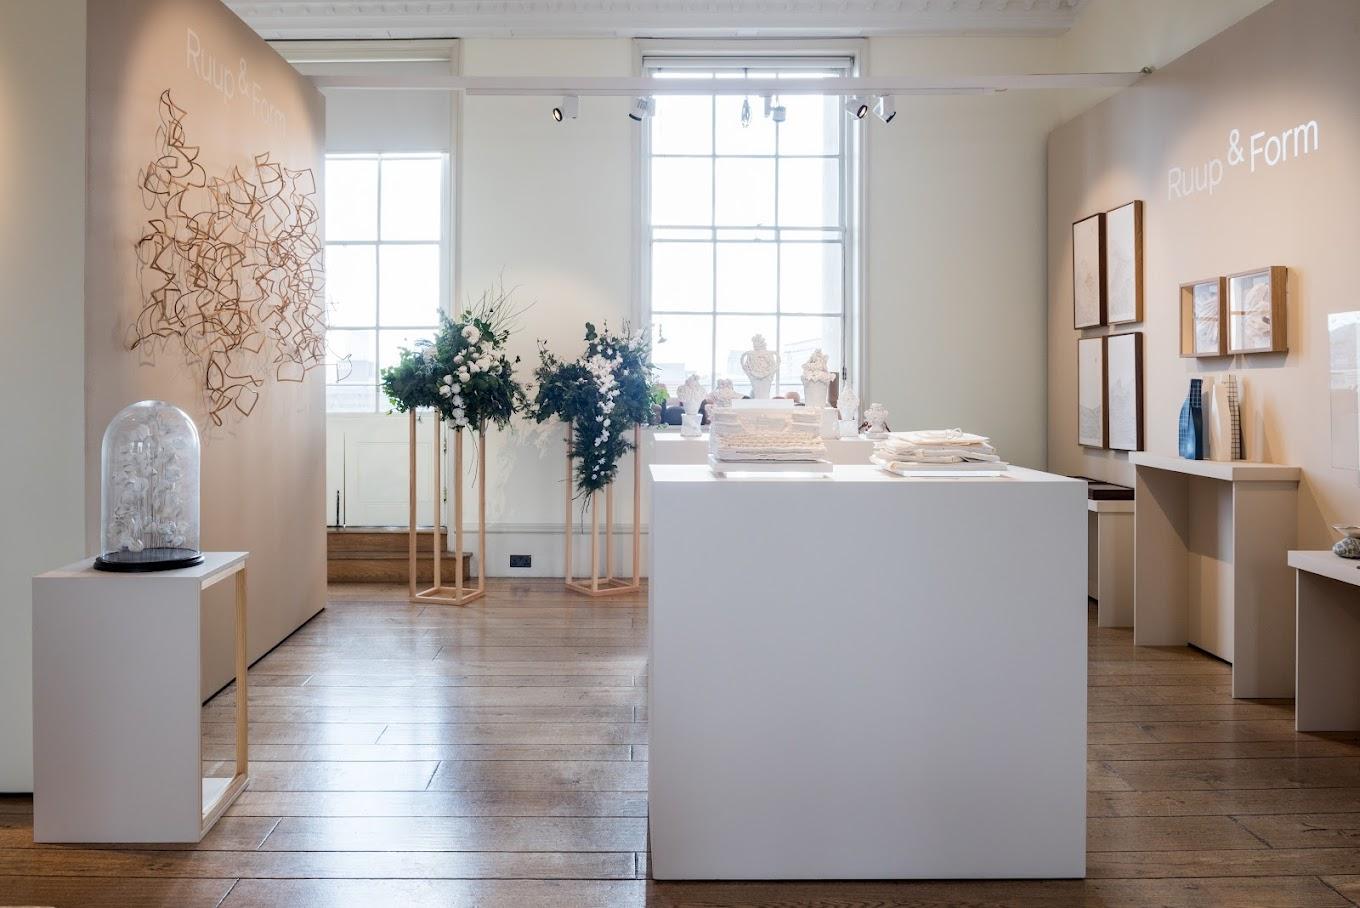 Ruup & Form | London, United Kingdom | Art Yourself Atelier